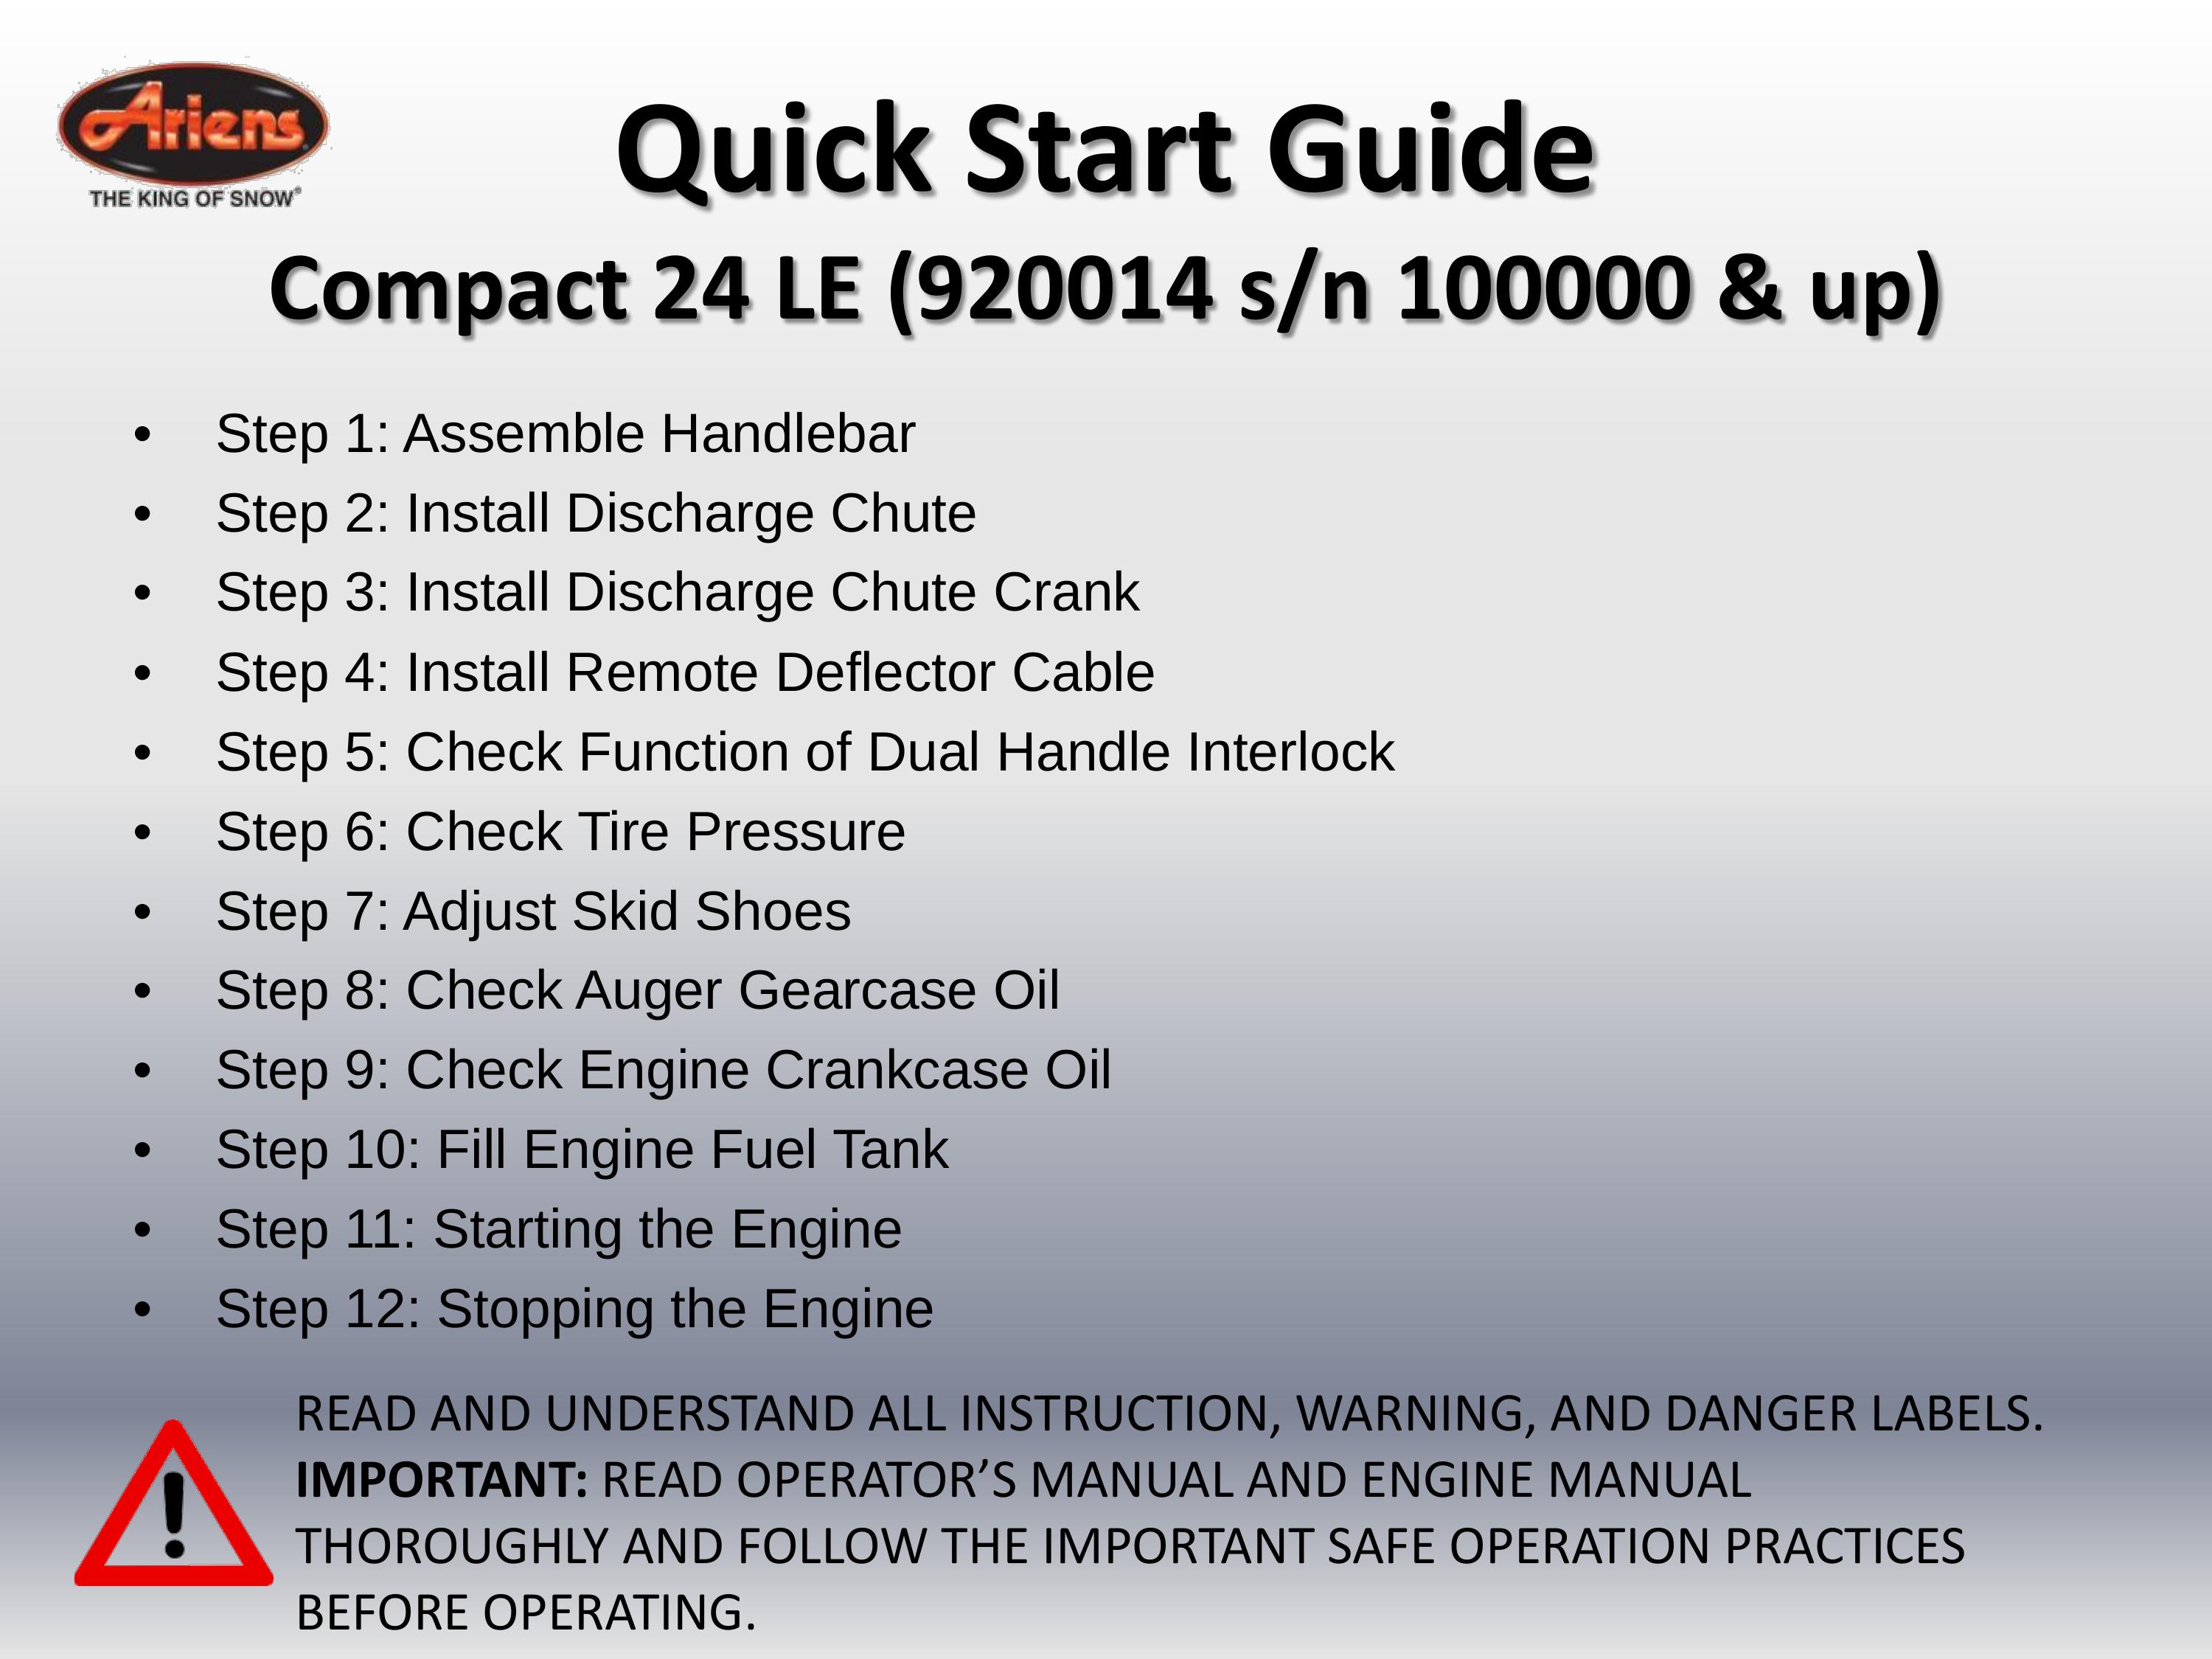 Ariens 24 LE (920014 s/n 100000 & up) Snow Blower User Manual